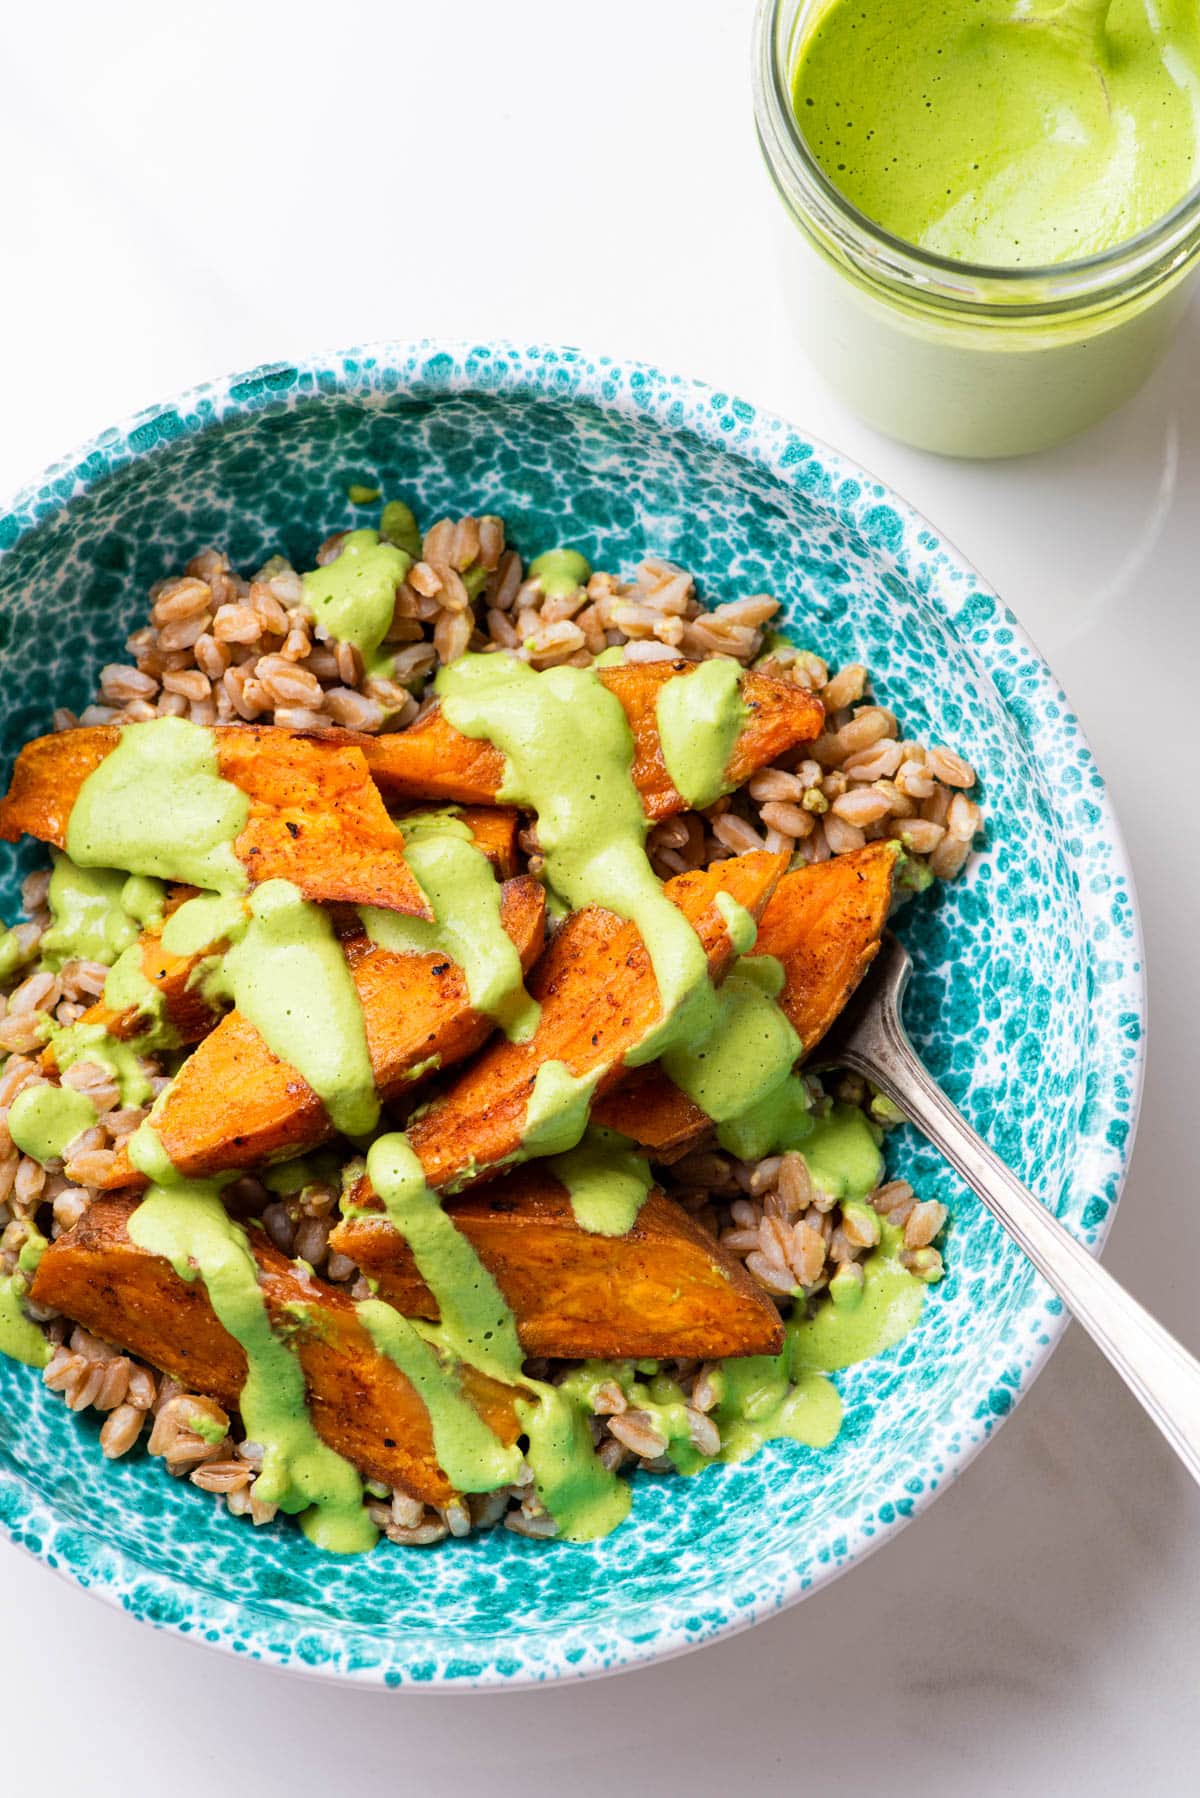 Vegan green goddess dressing drizzle on a bowl of farro and sweet potatoes.